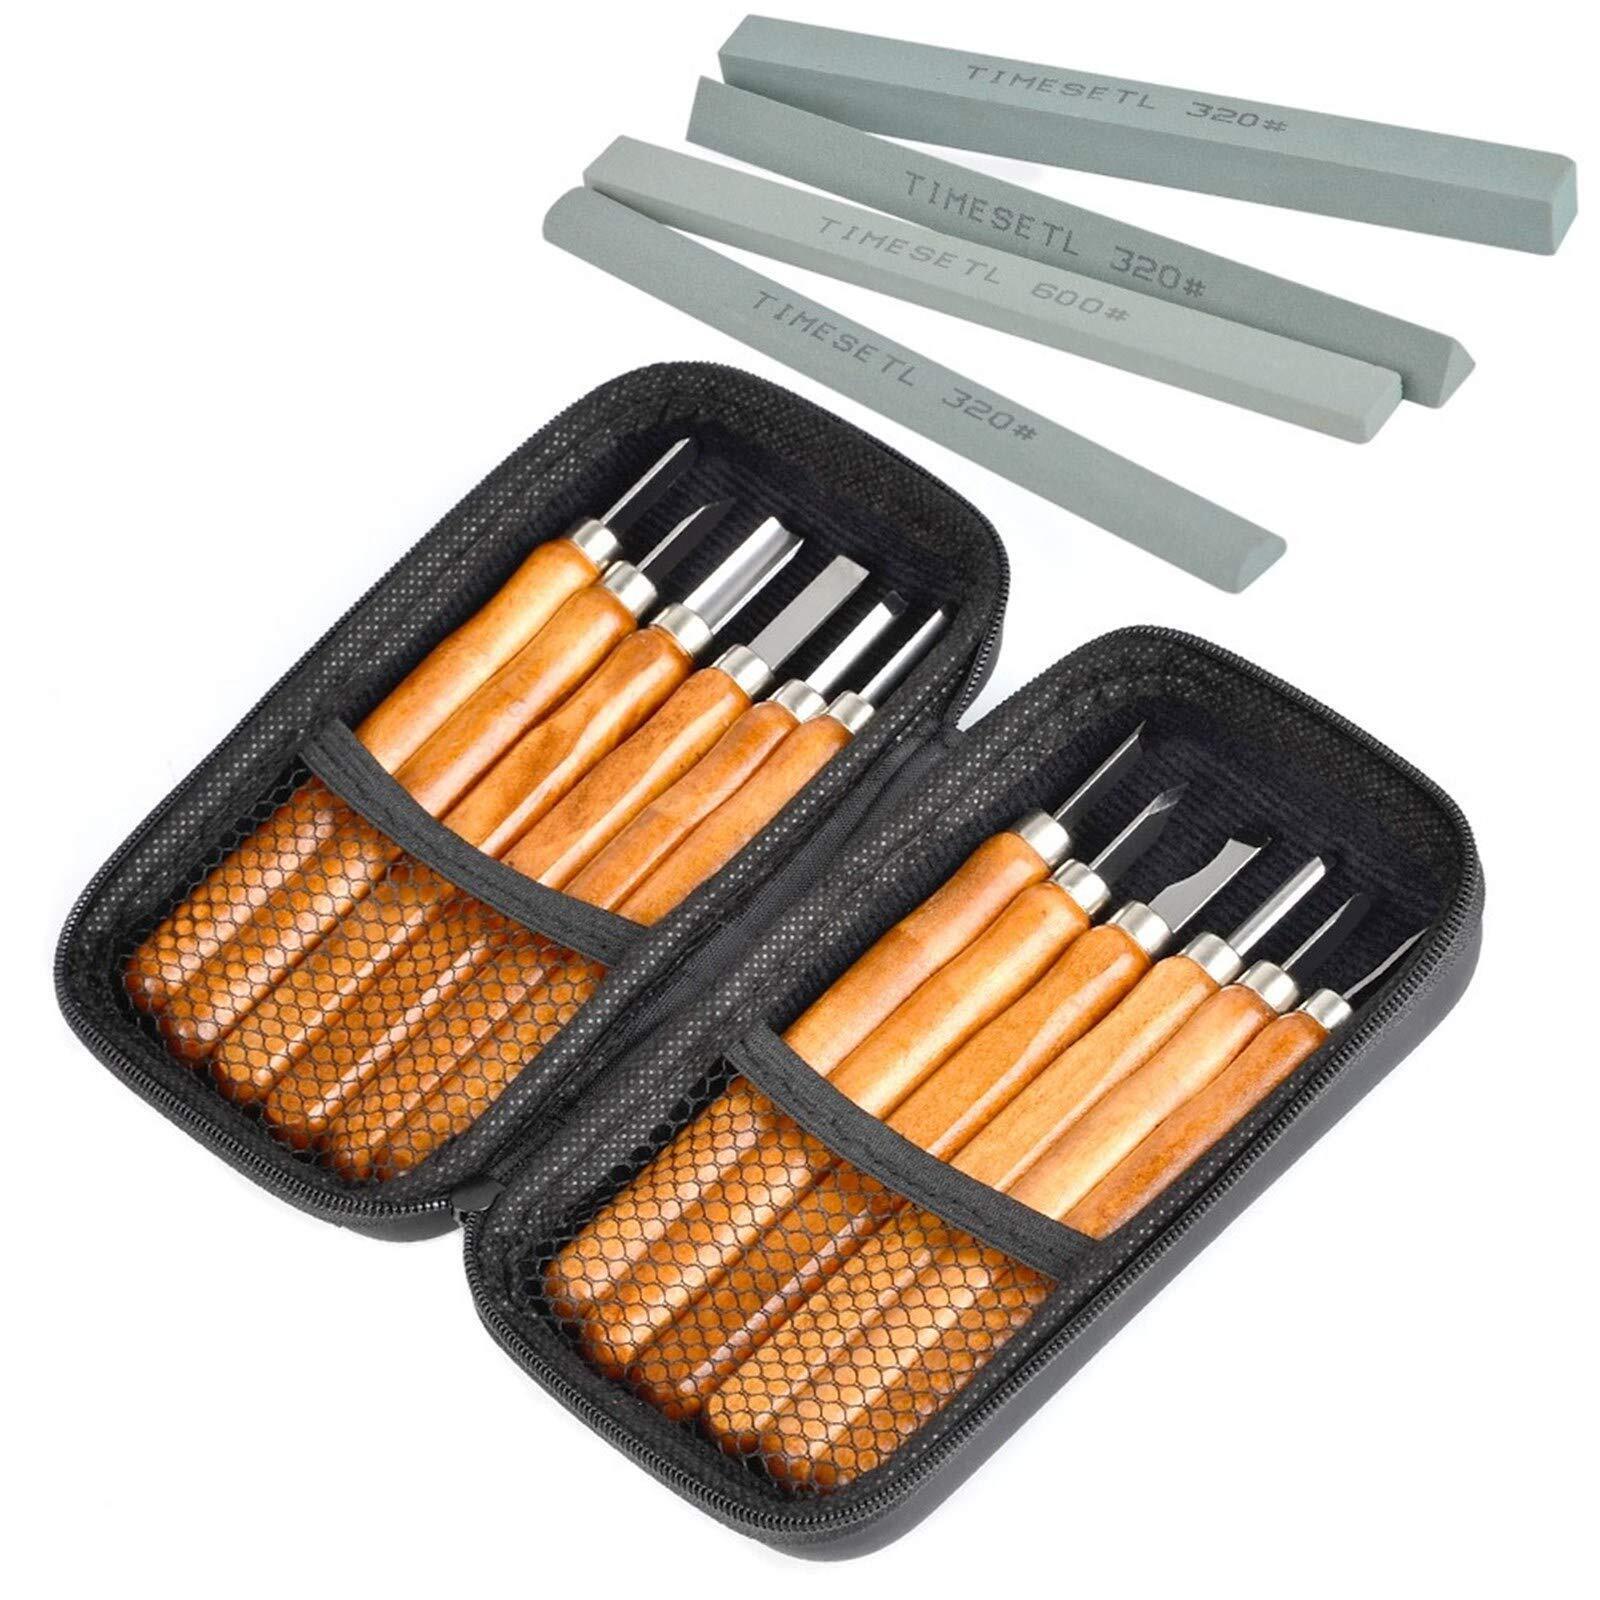 17Pack Small Wood Carving Set, 12pcs Wood Carving Tools SK2 Carbon Steel + 4p...